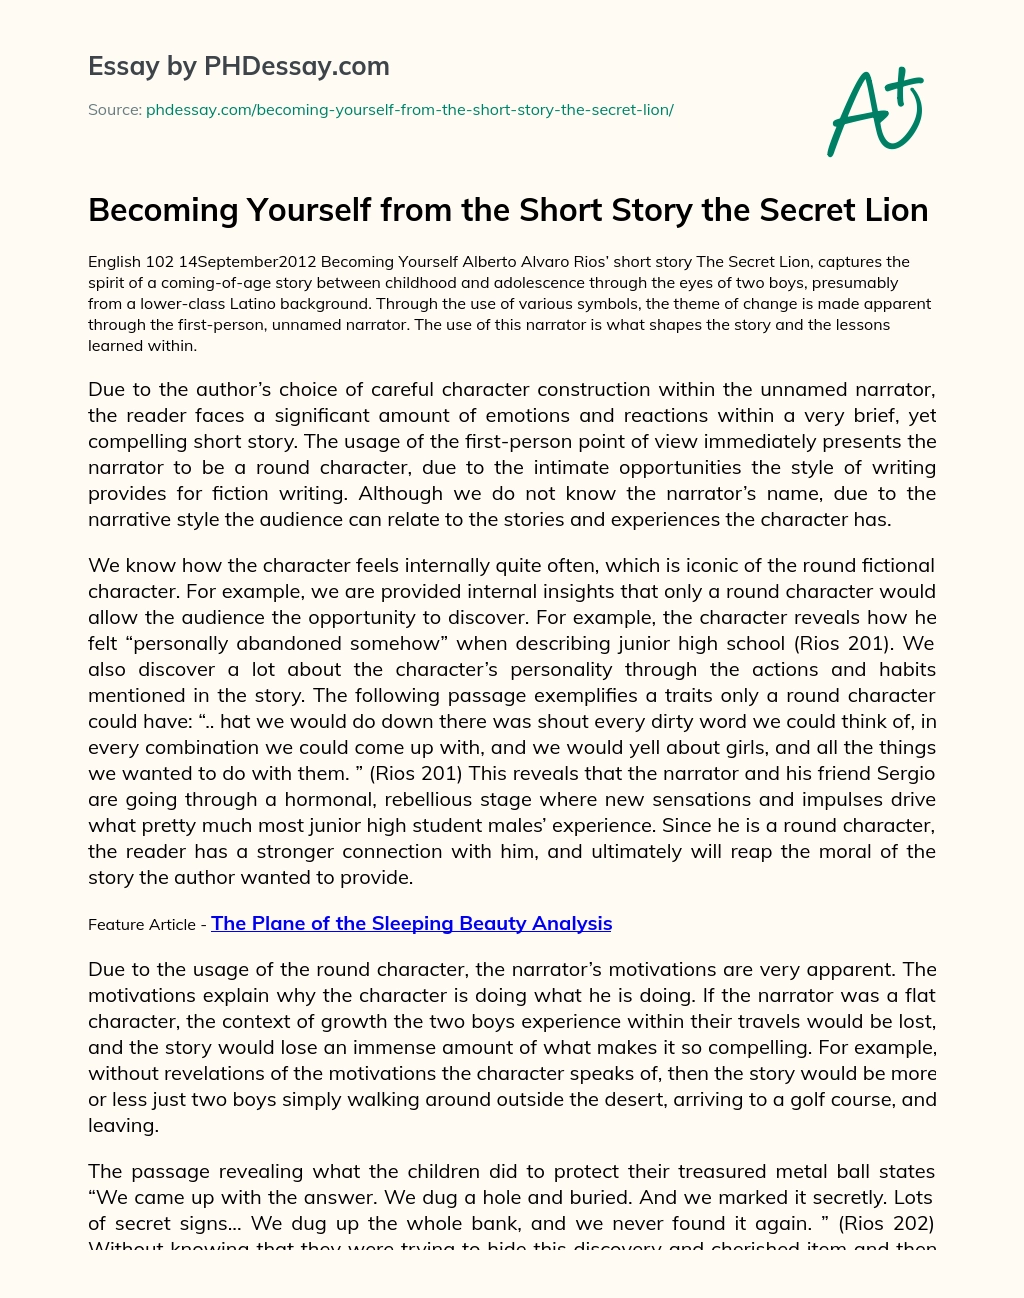 Becoming Yourself from the Short Story the Secret Lion essay